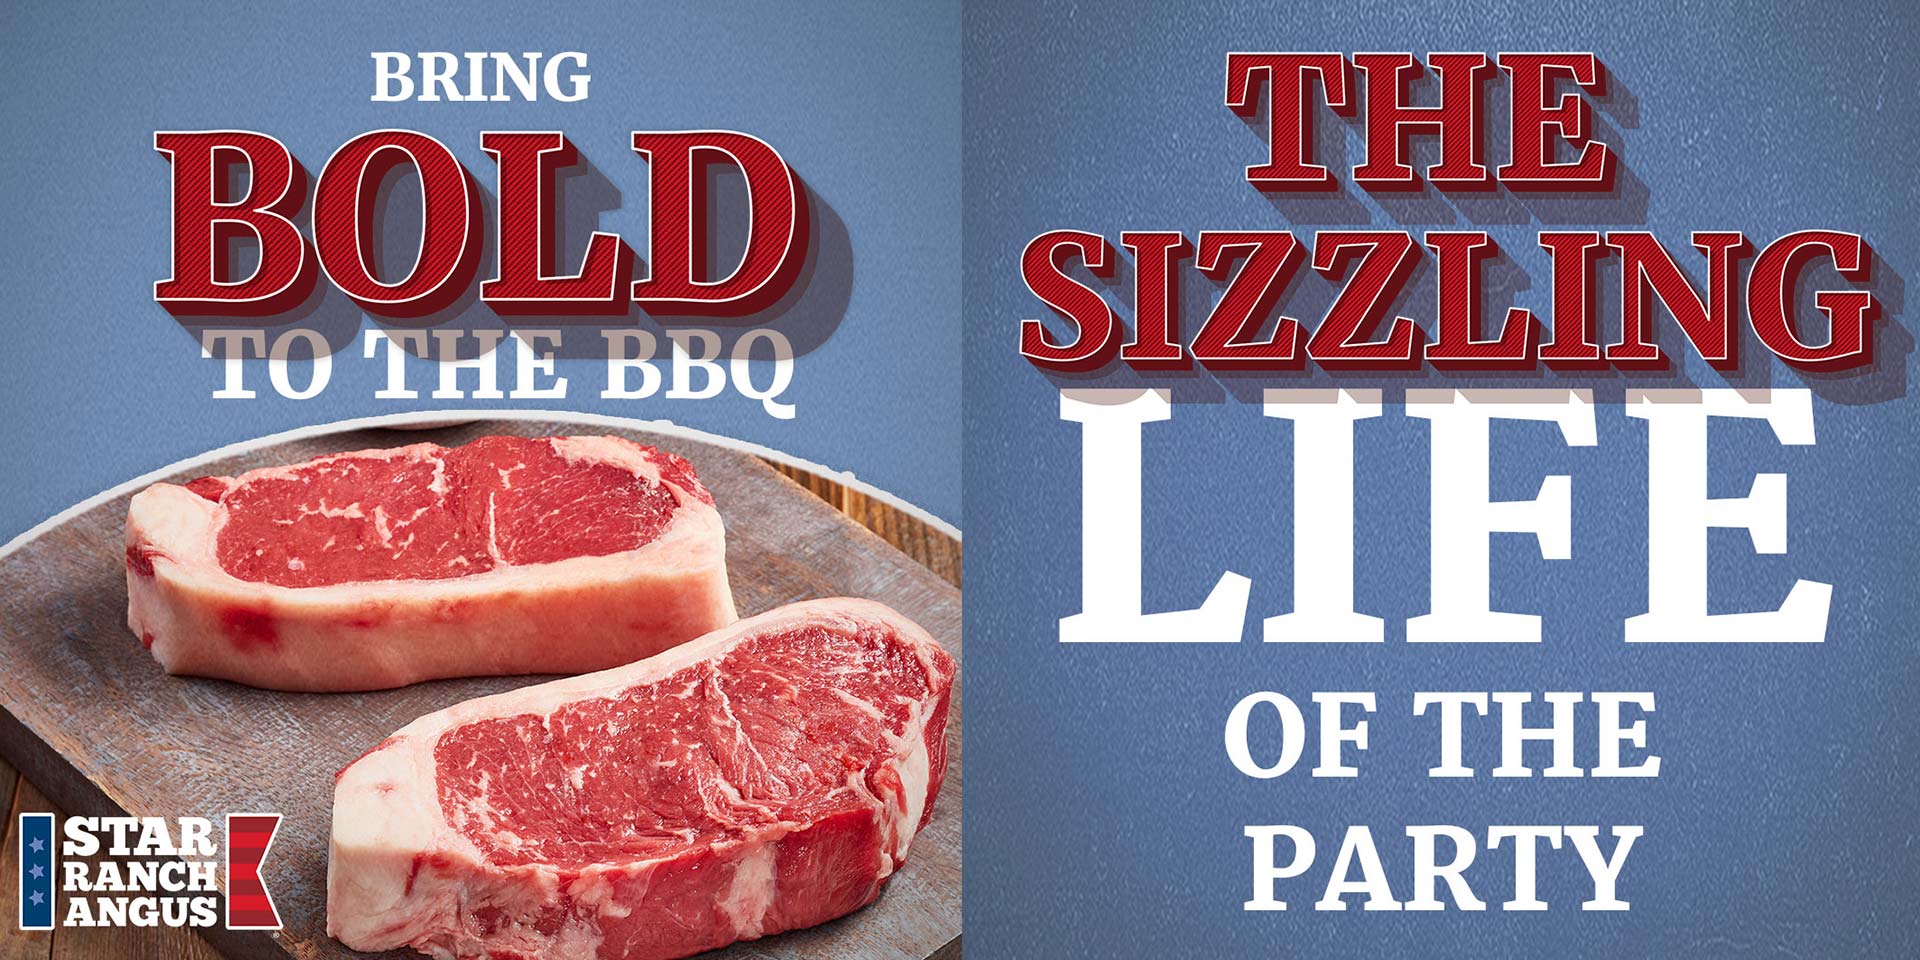 Star Ranch Angus grilling campaigns featuring steak meat cuts